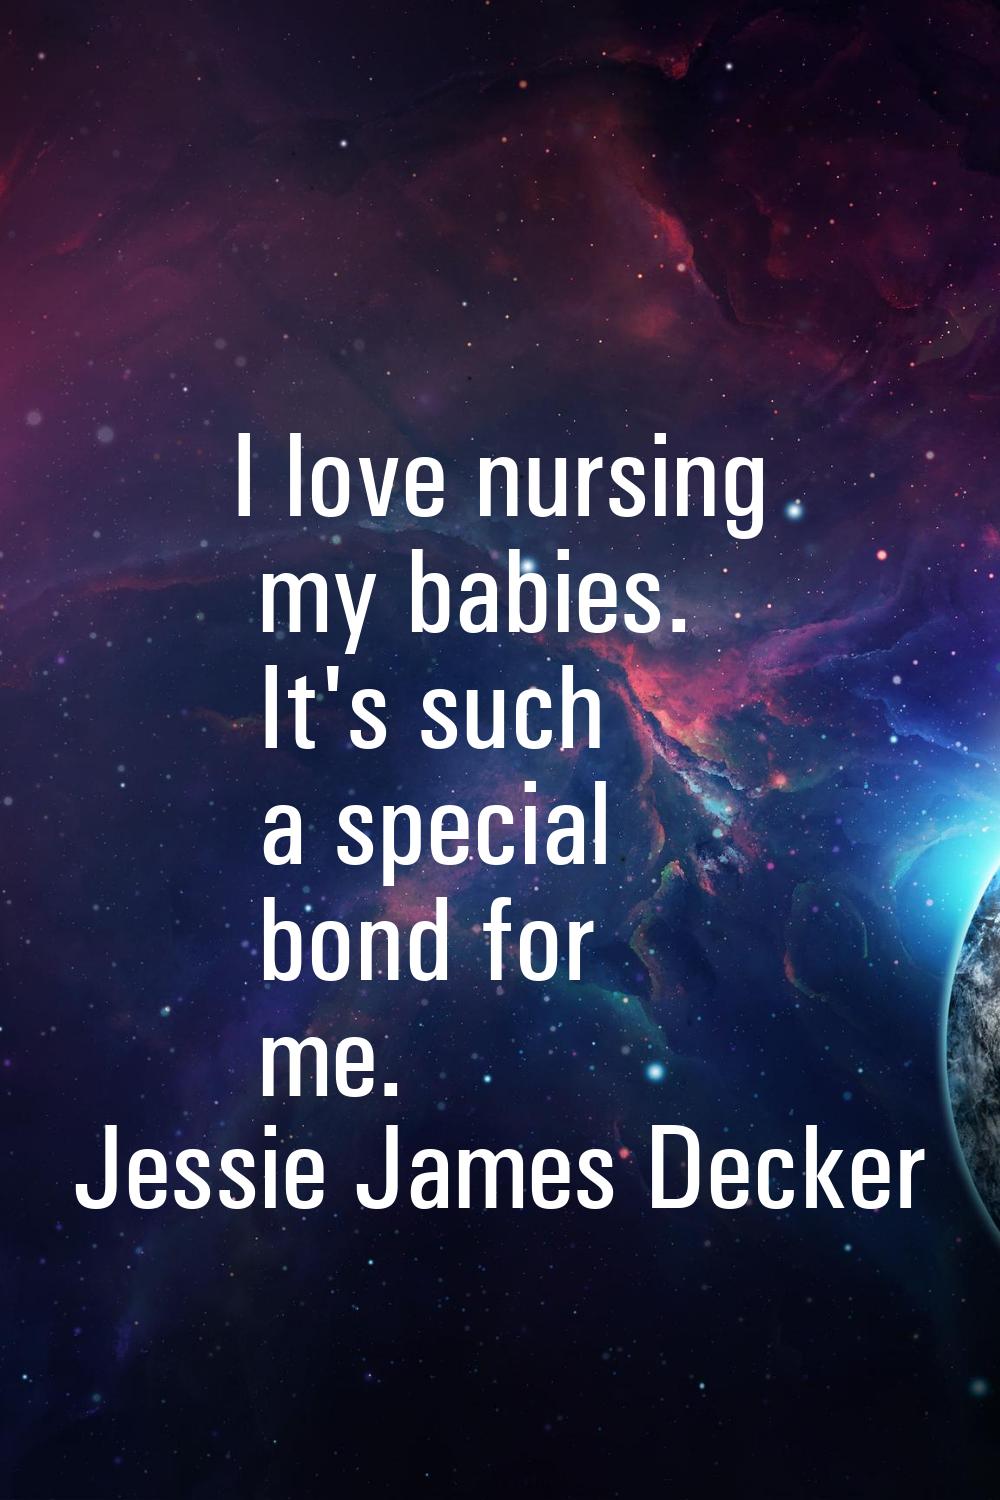 I love nursing my babies. It's such a special bond for me.